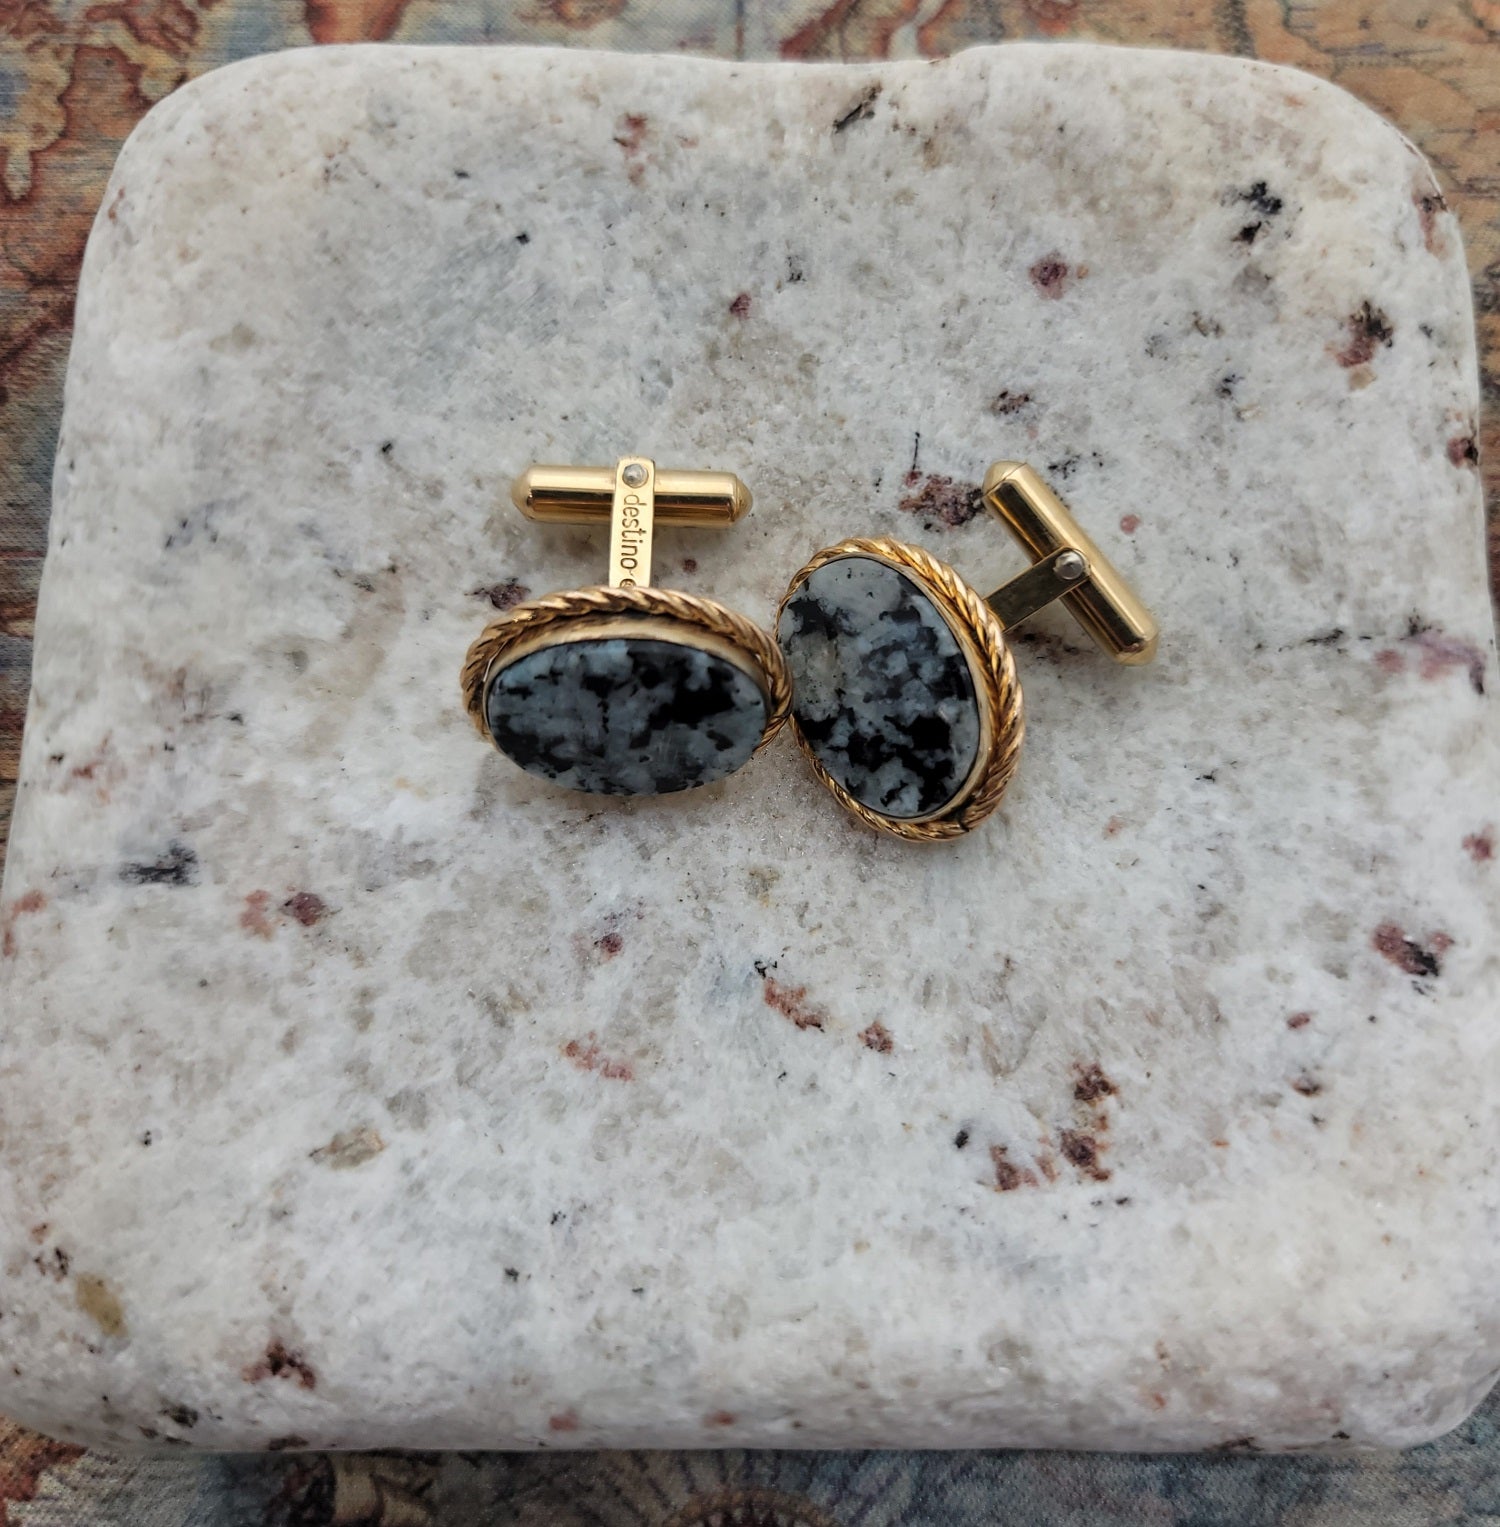 Elegant Vintage Hand-Crafted Black & White Marble Gold Plated Destino Cufflinks  Peter's Vaults